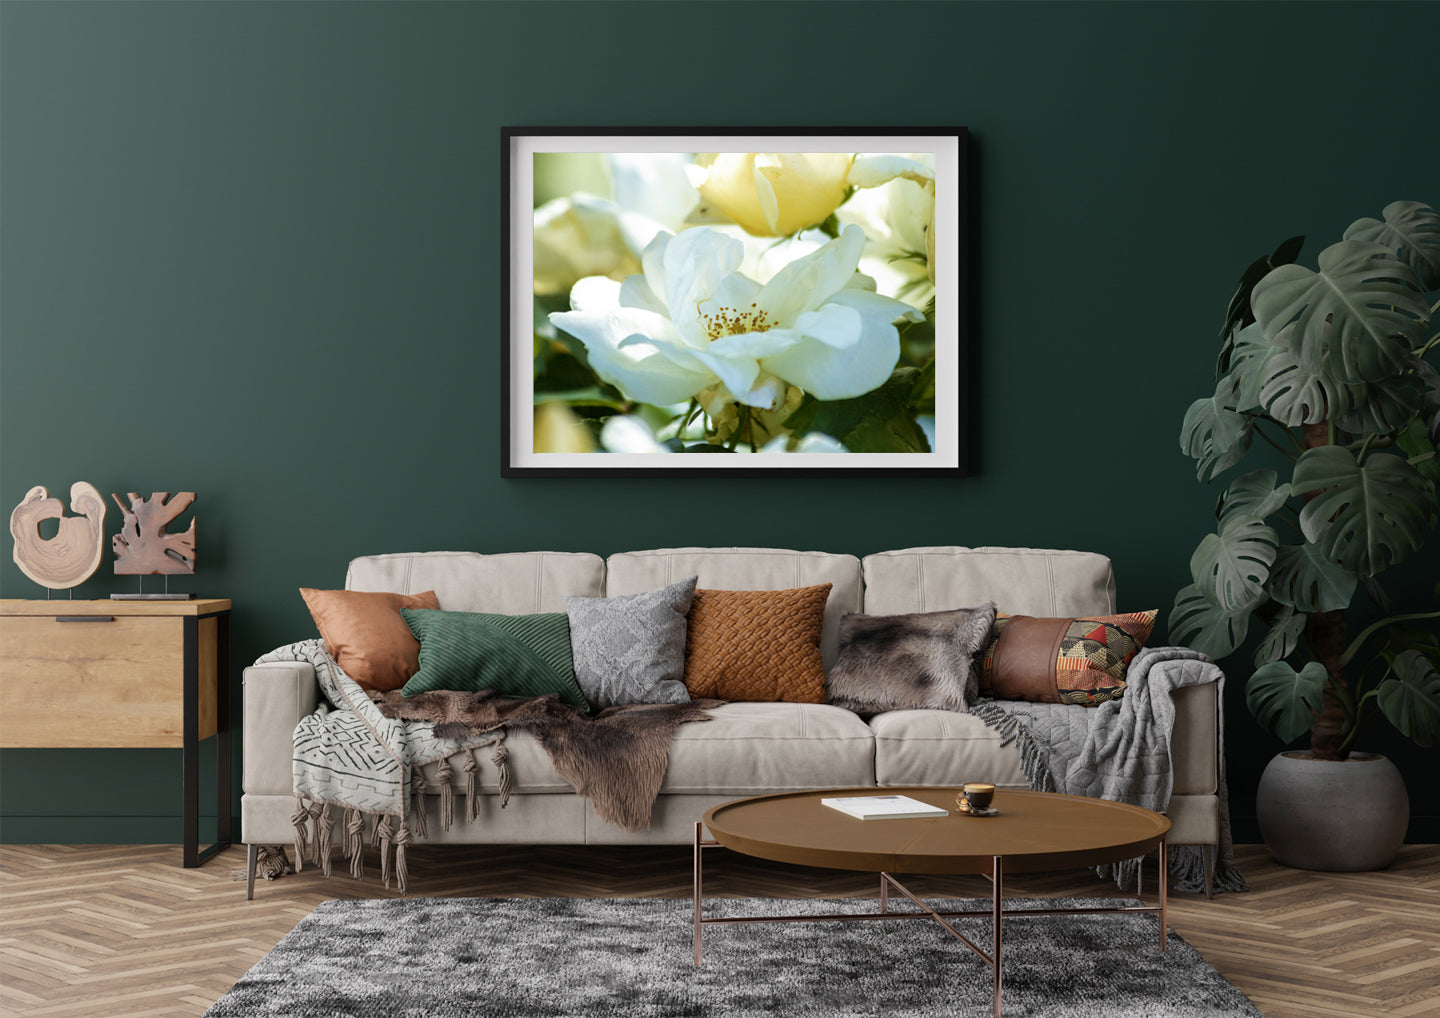 Decorate your home with Mackinac Island floral wall art.  Photographs by island resident Jennifer Wohletz of Mackinac Memories offer a unique perspective of flowers blooming in island gardens.  The fragrant petals of this white rose blooming in a Mackinac Island cottage garden symbolize love and new beginnings.